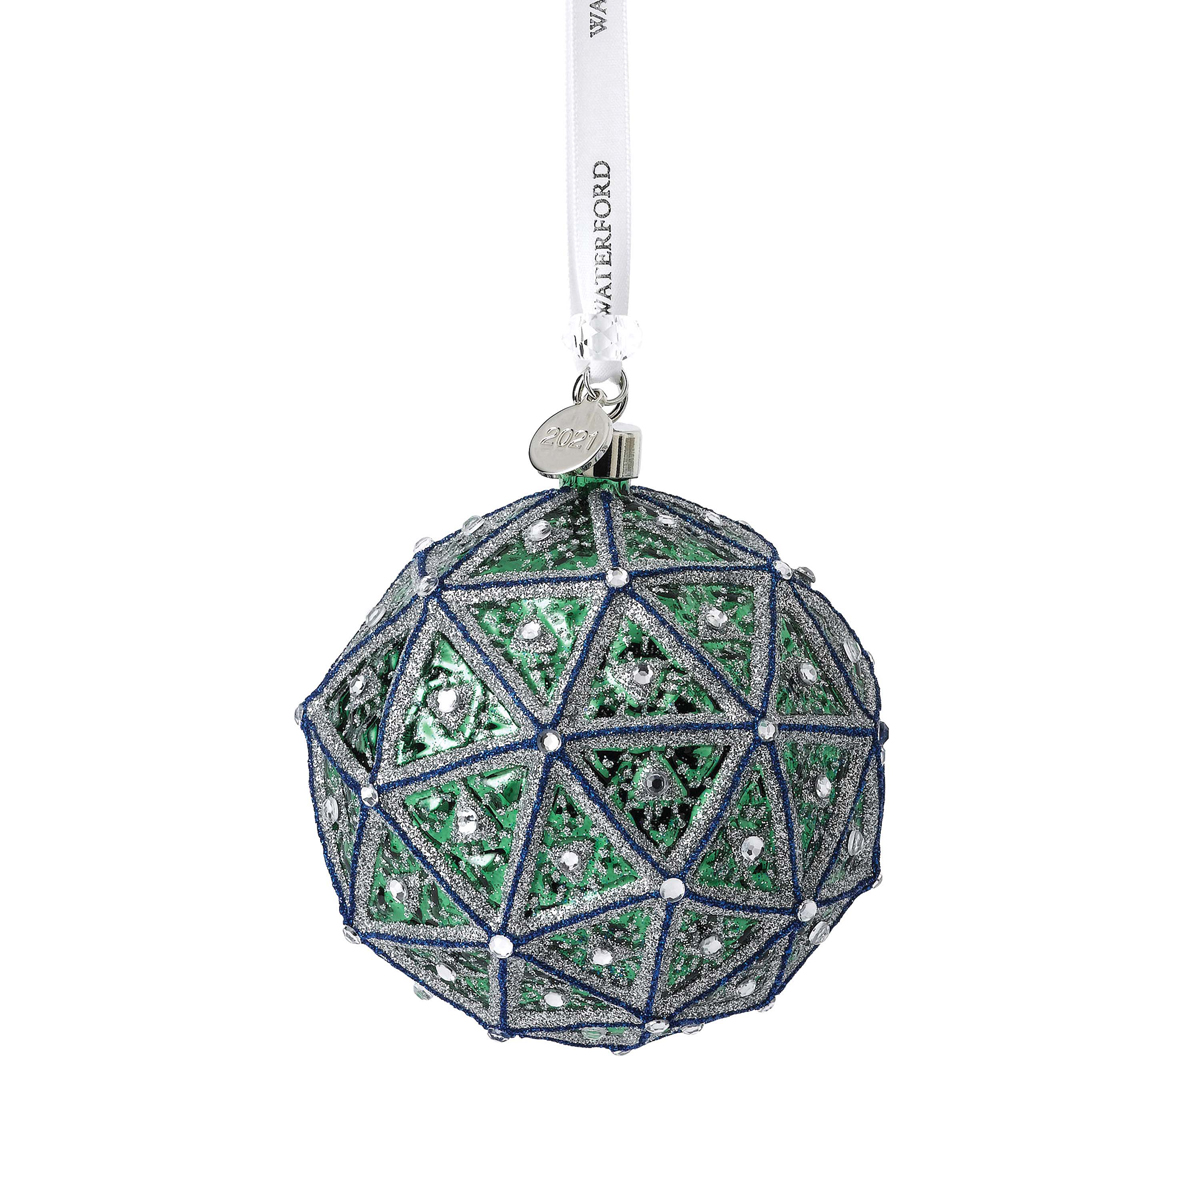 Waterford 2021 Times Square Replica Ball Ornament